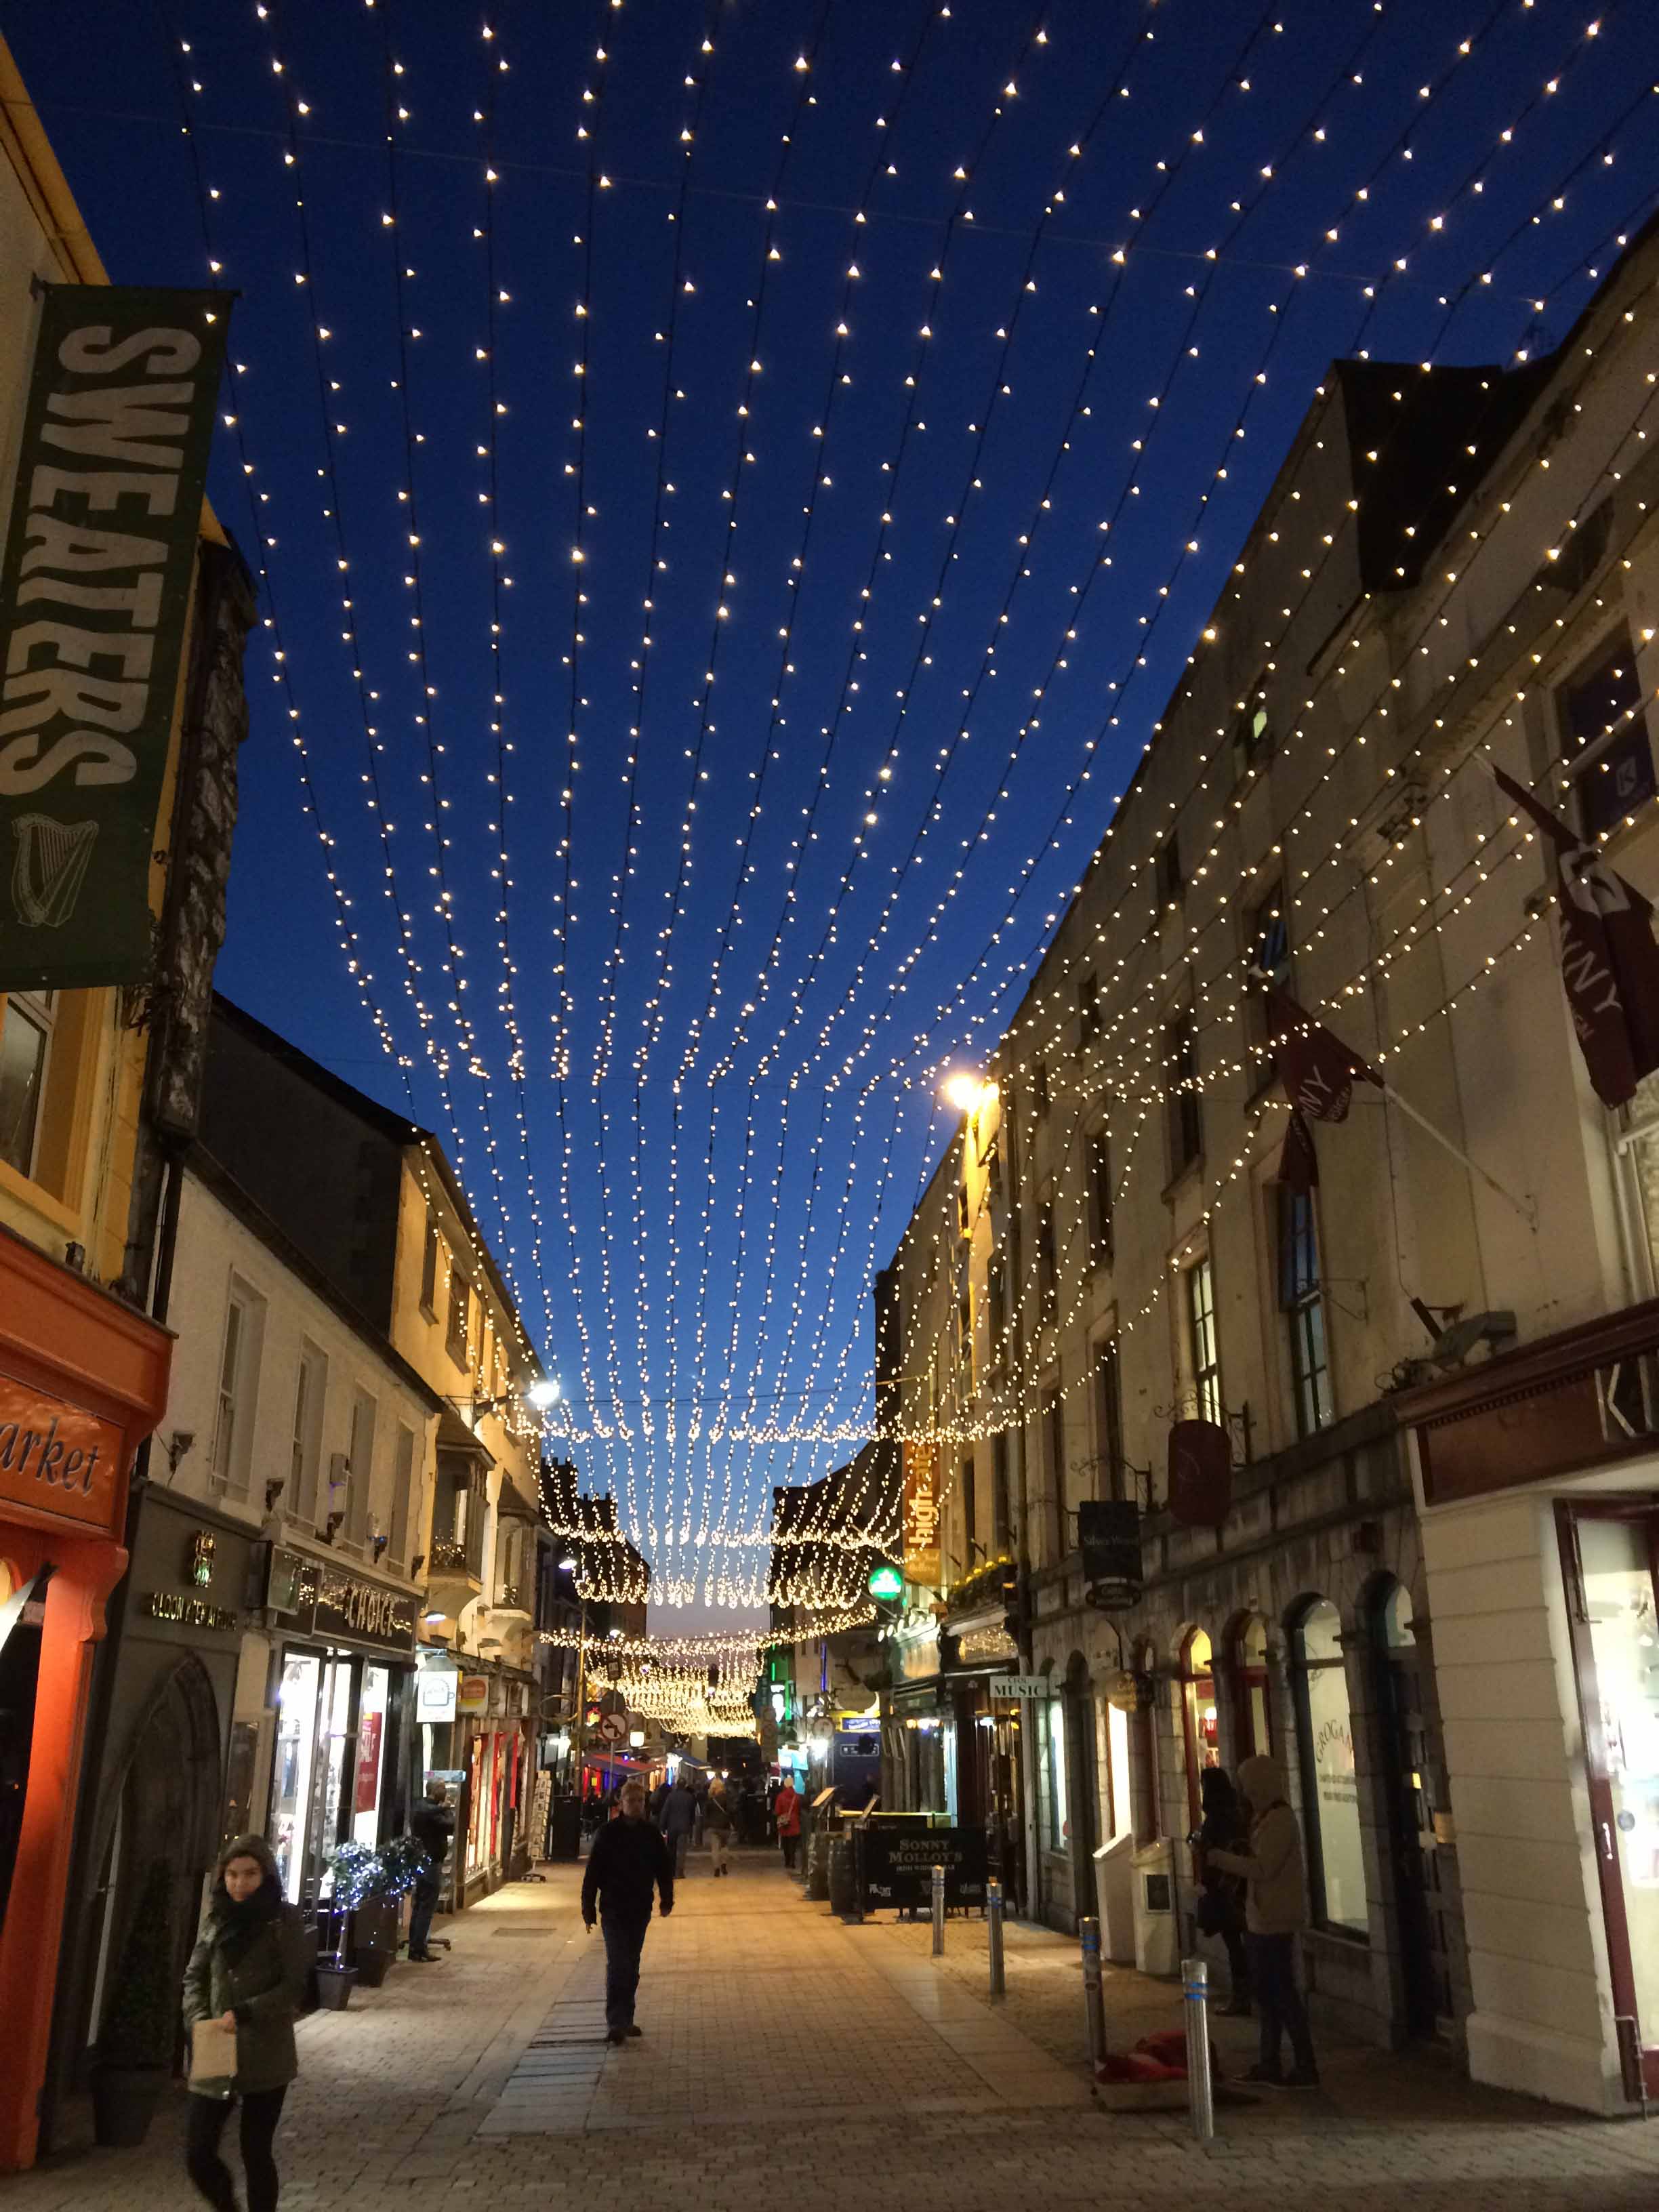 Streets lit up at night in Galway, Ireland.